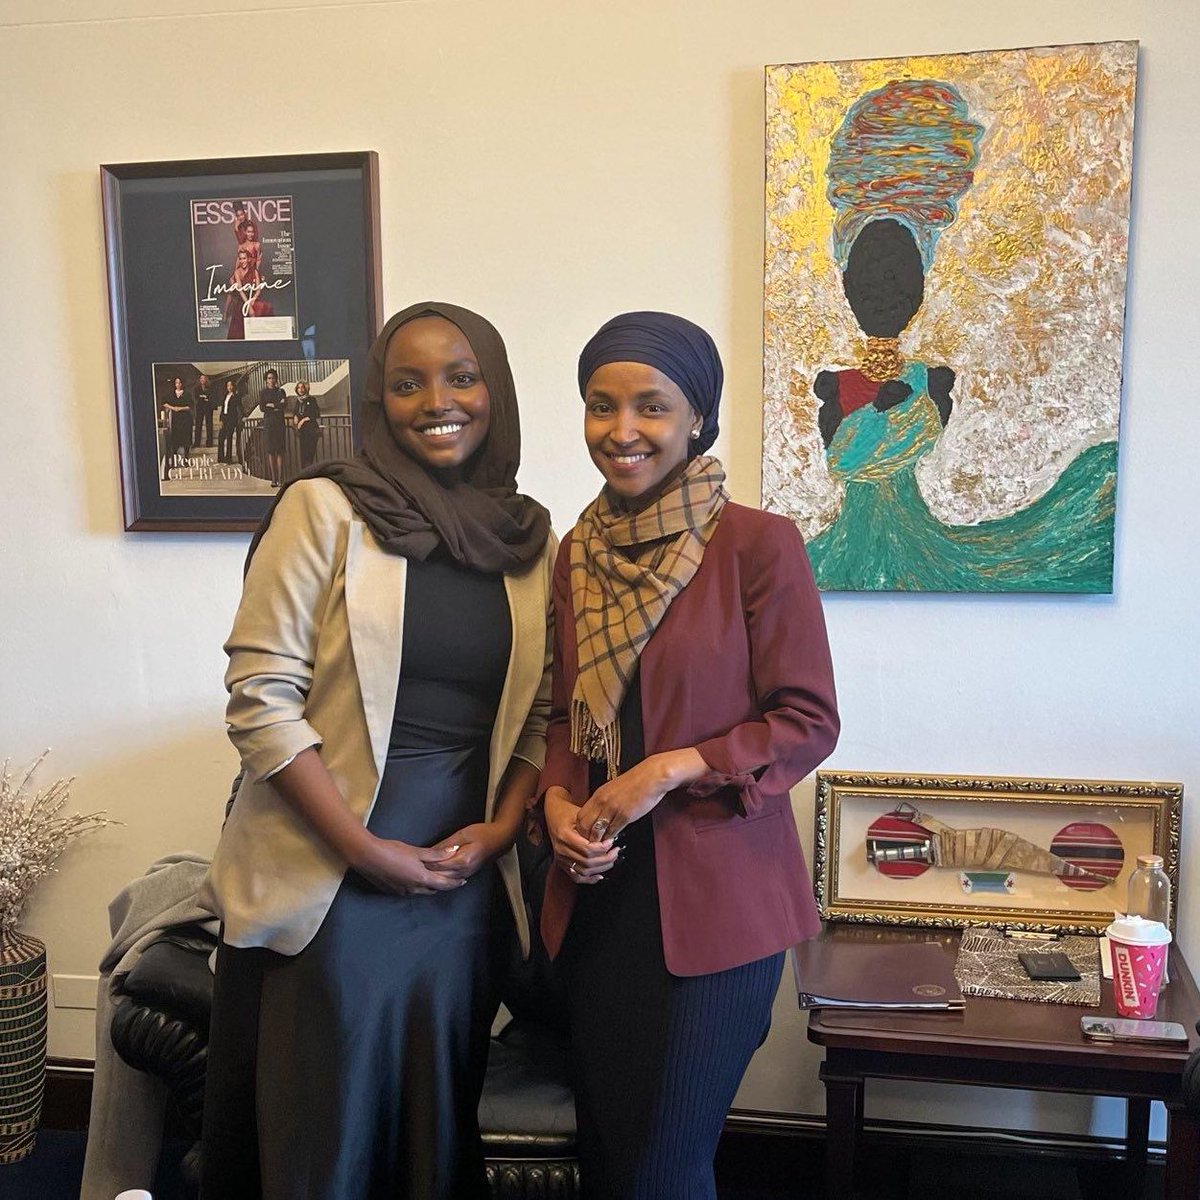 The first Somali-American Congresswoman 🤝🏽The first elected Somali-American Mayor. It was so great to see @Nadia_Mohameds, her leadership serves as an inspiration. So proud to see barriers broken by a fellow Minnesotan!